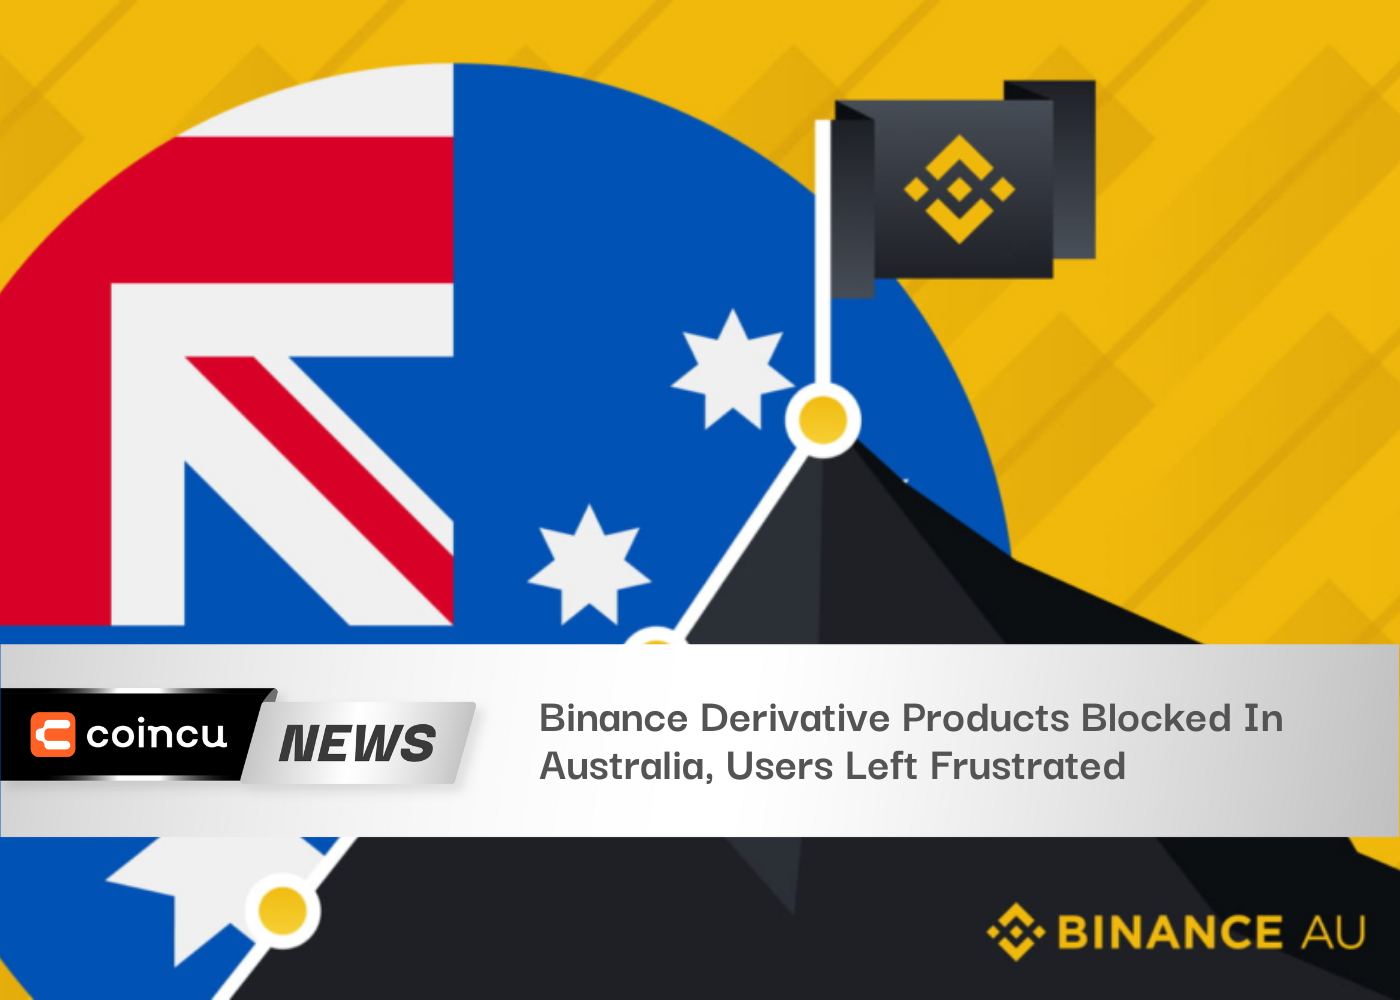 Binance Derivative Products Blocked In Australia, Users Left Frustrated